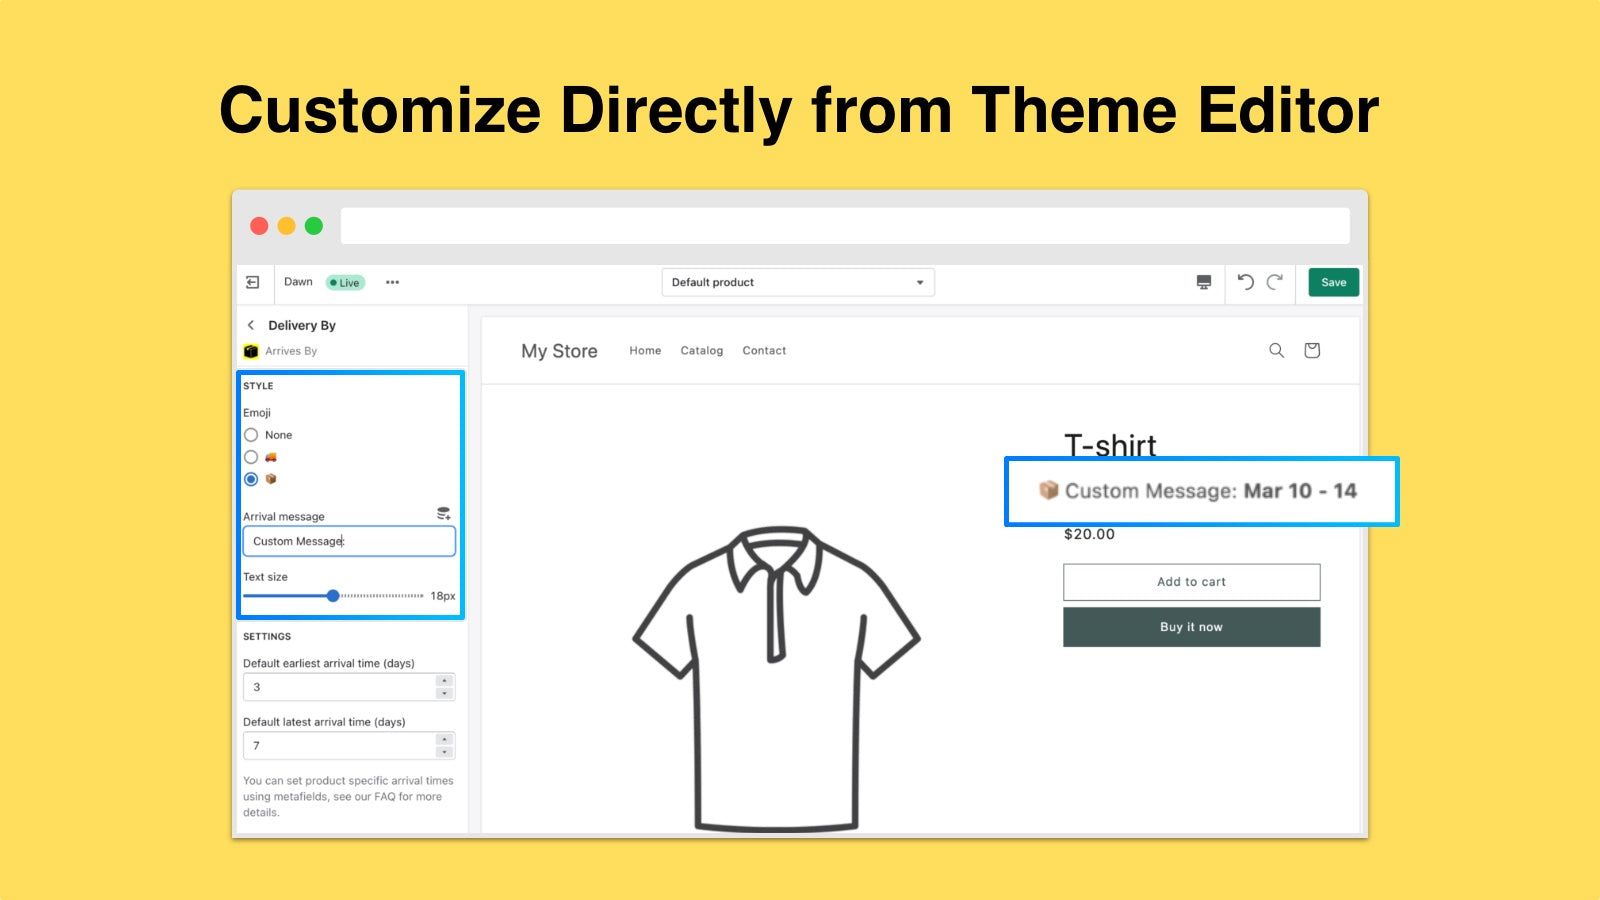 Customize Directly from Theme Editor